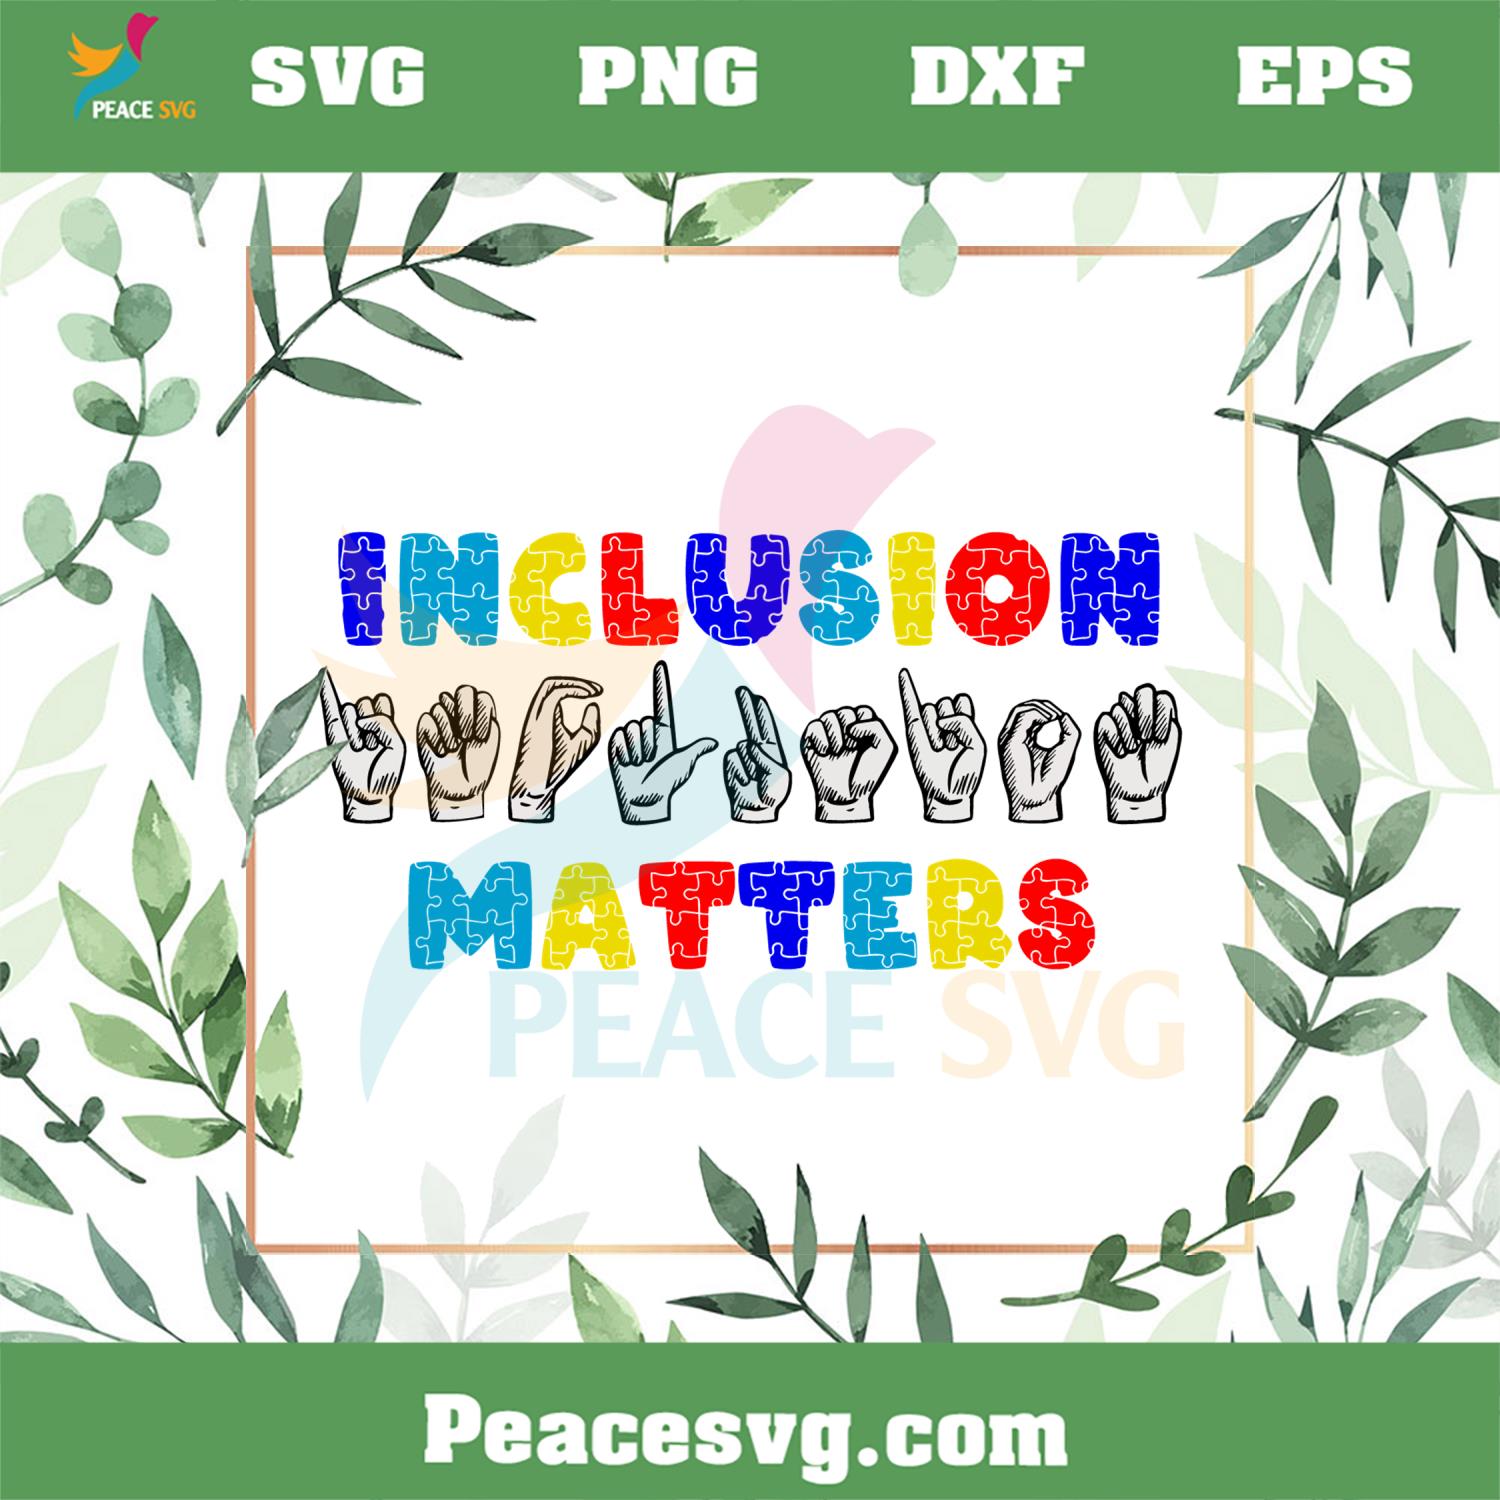 Inclusion Matters Special Education Autism Awareness SVG Cutting Files